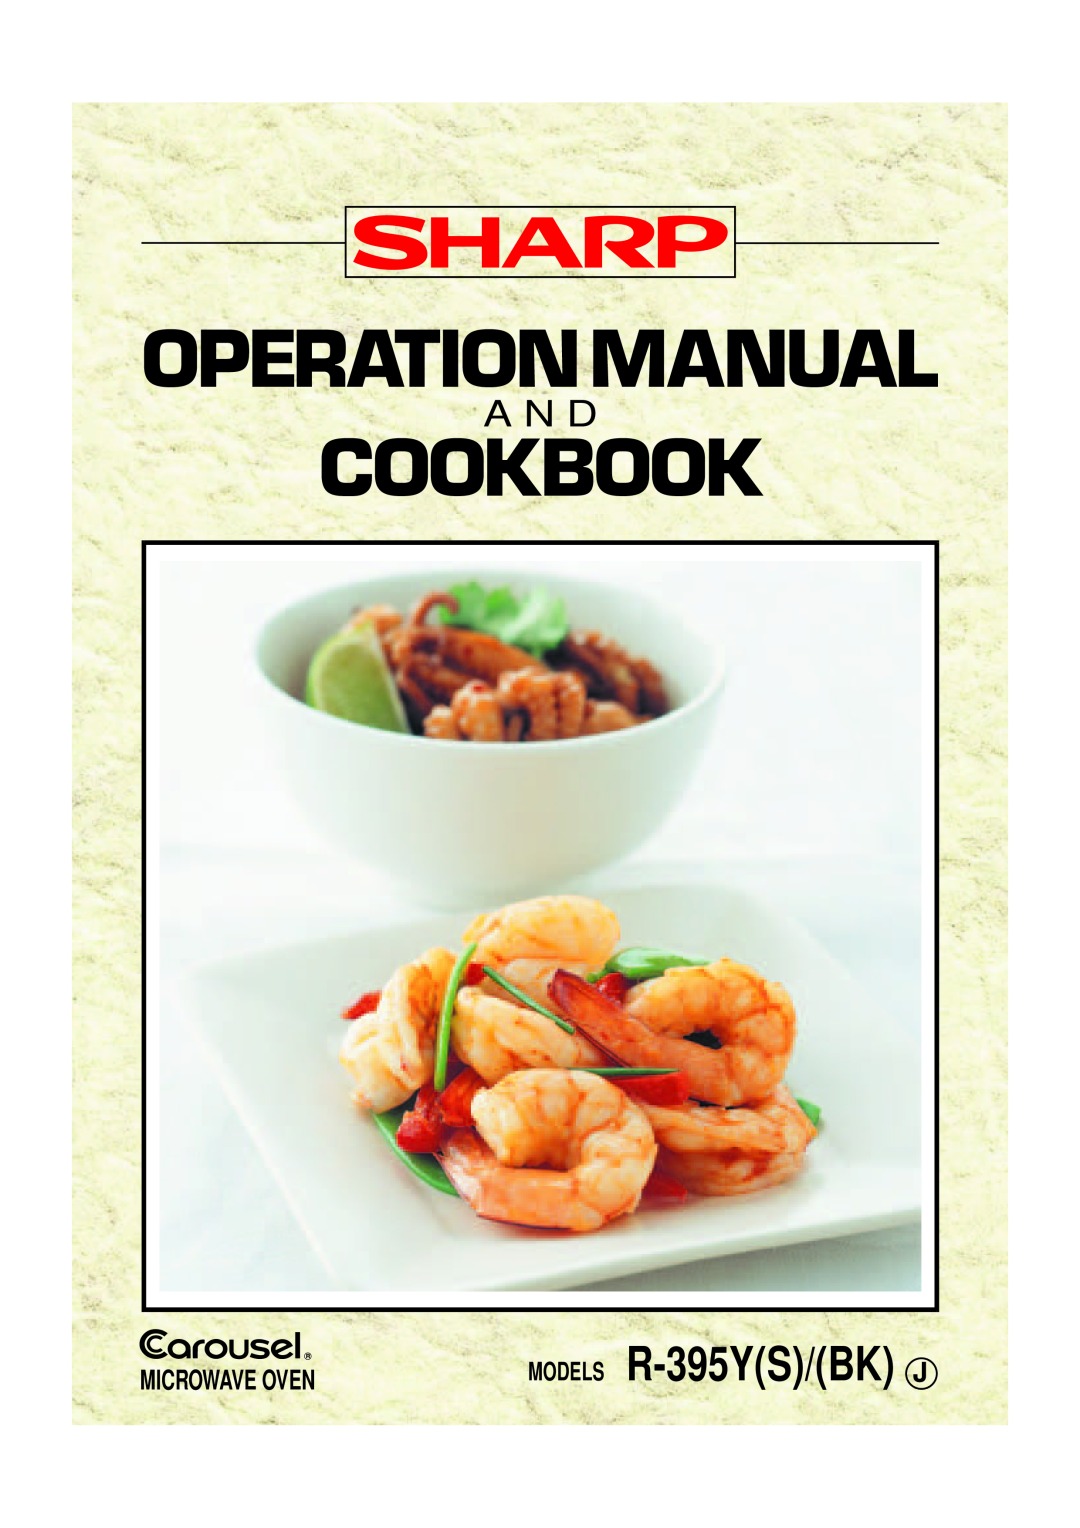 Sharp R395Y O/M, R-395Y(S) operation manual Microwave Oven, Operationmanual, Cookbook, MODELS R-395YS/BK J, A N D 